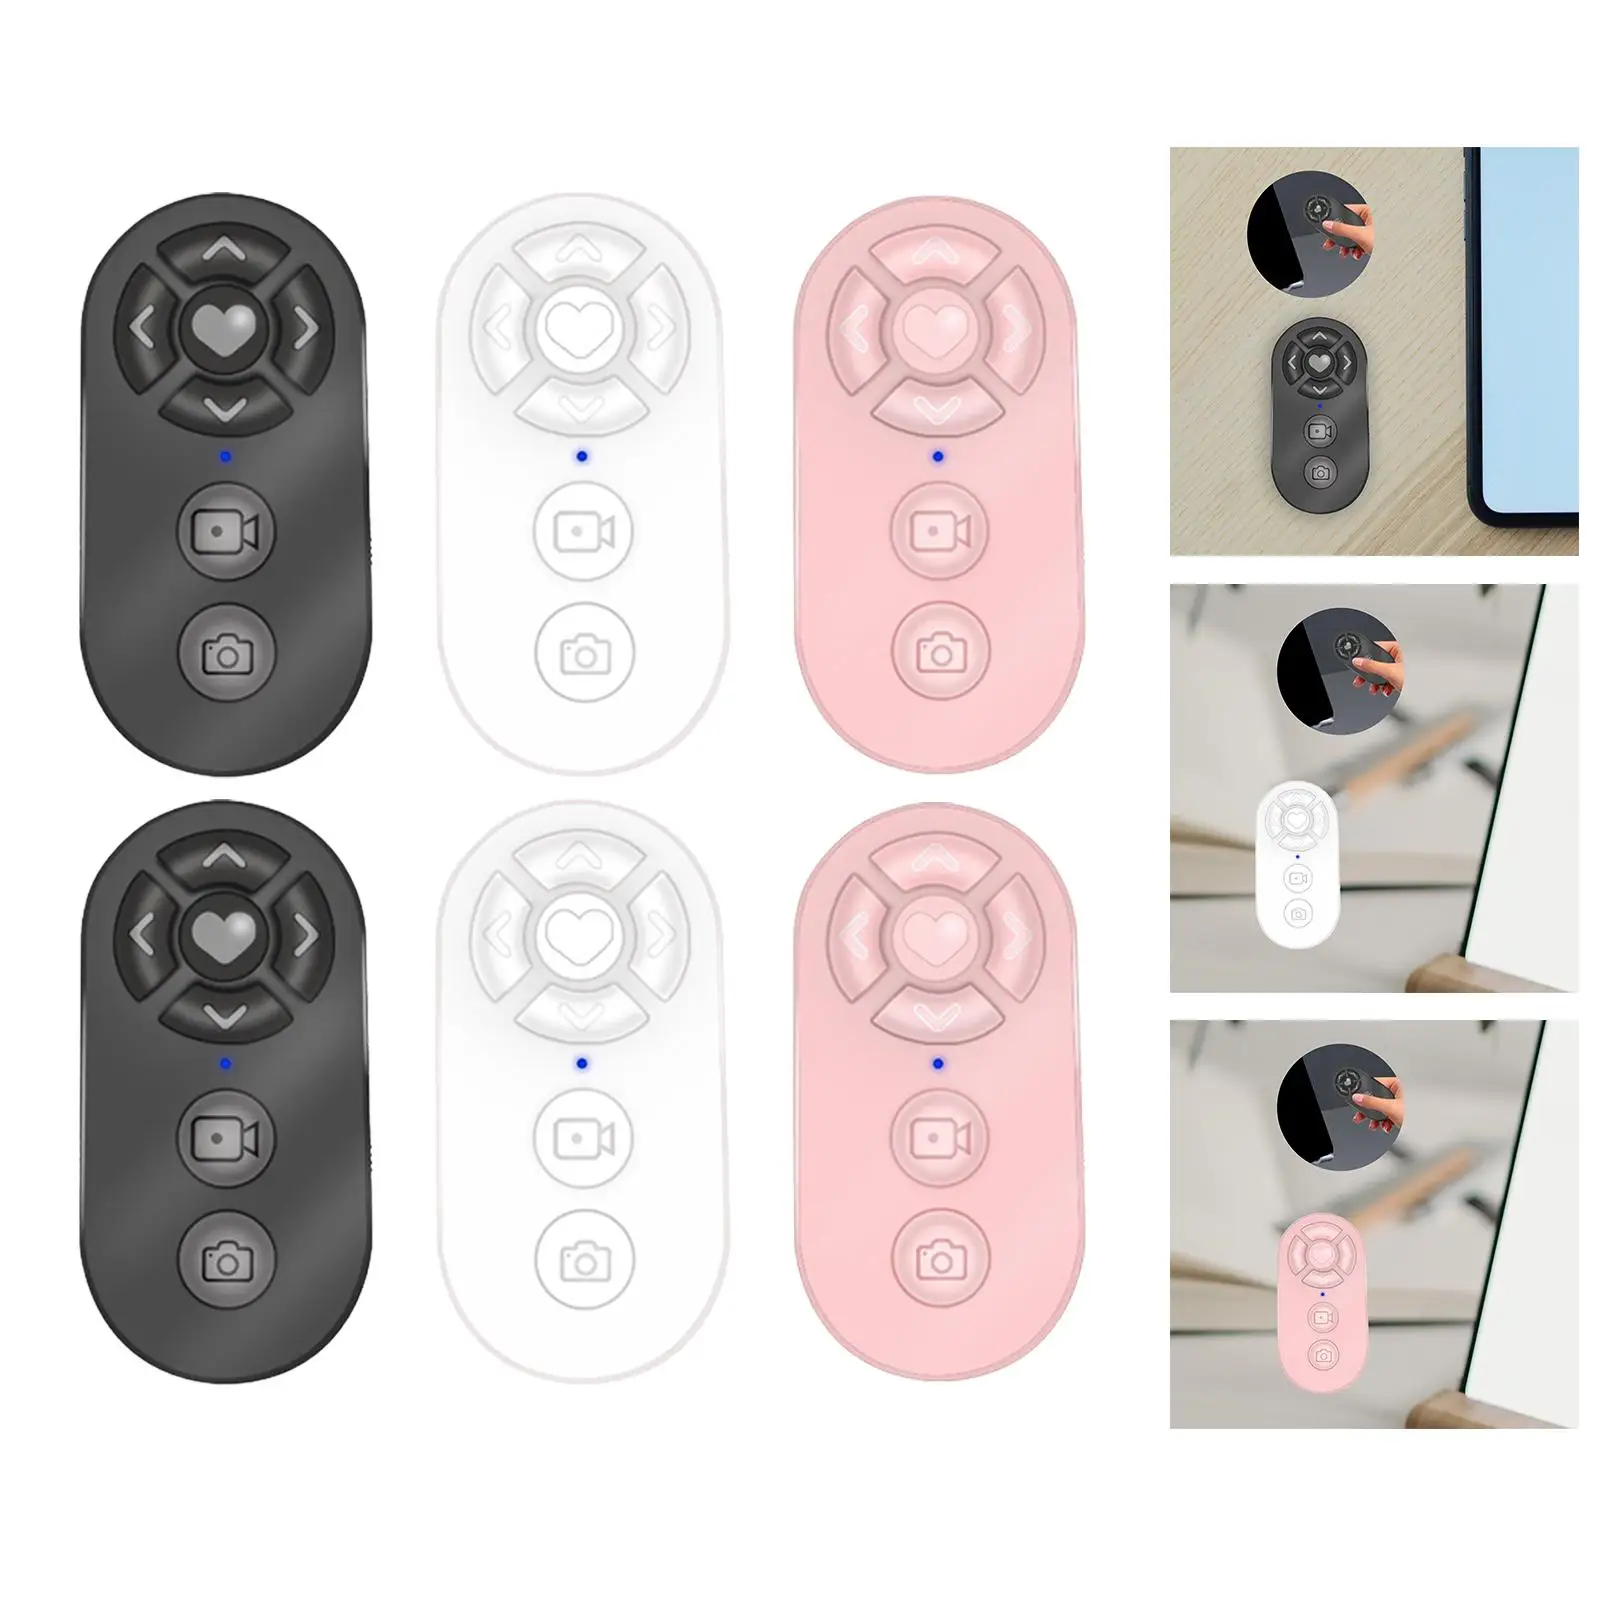 Phone App Page Turner Bluetooth Remote Control Wireless Remote Selfie Battery Operated for Smartphones Selfie Convenient Sturdy